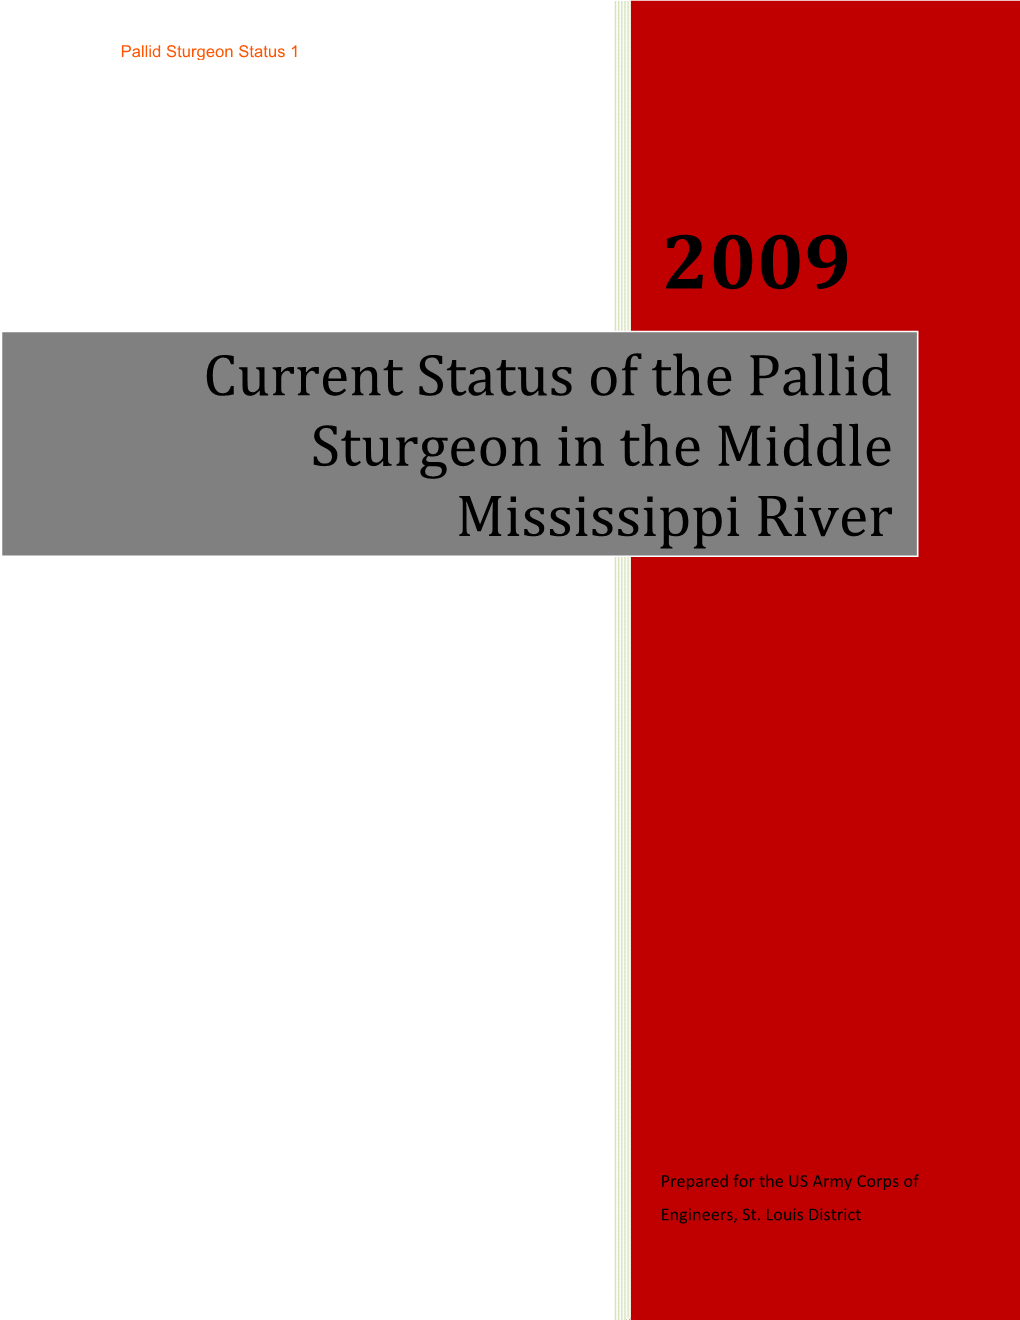 Current Status of the Pallid Sturgeon in the Middle Mississippi River